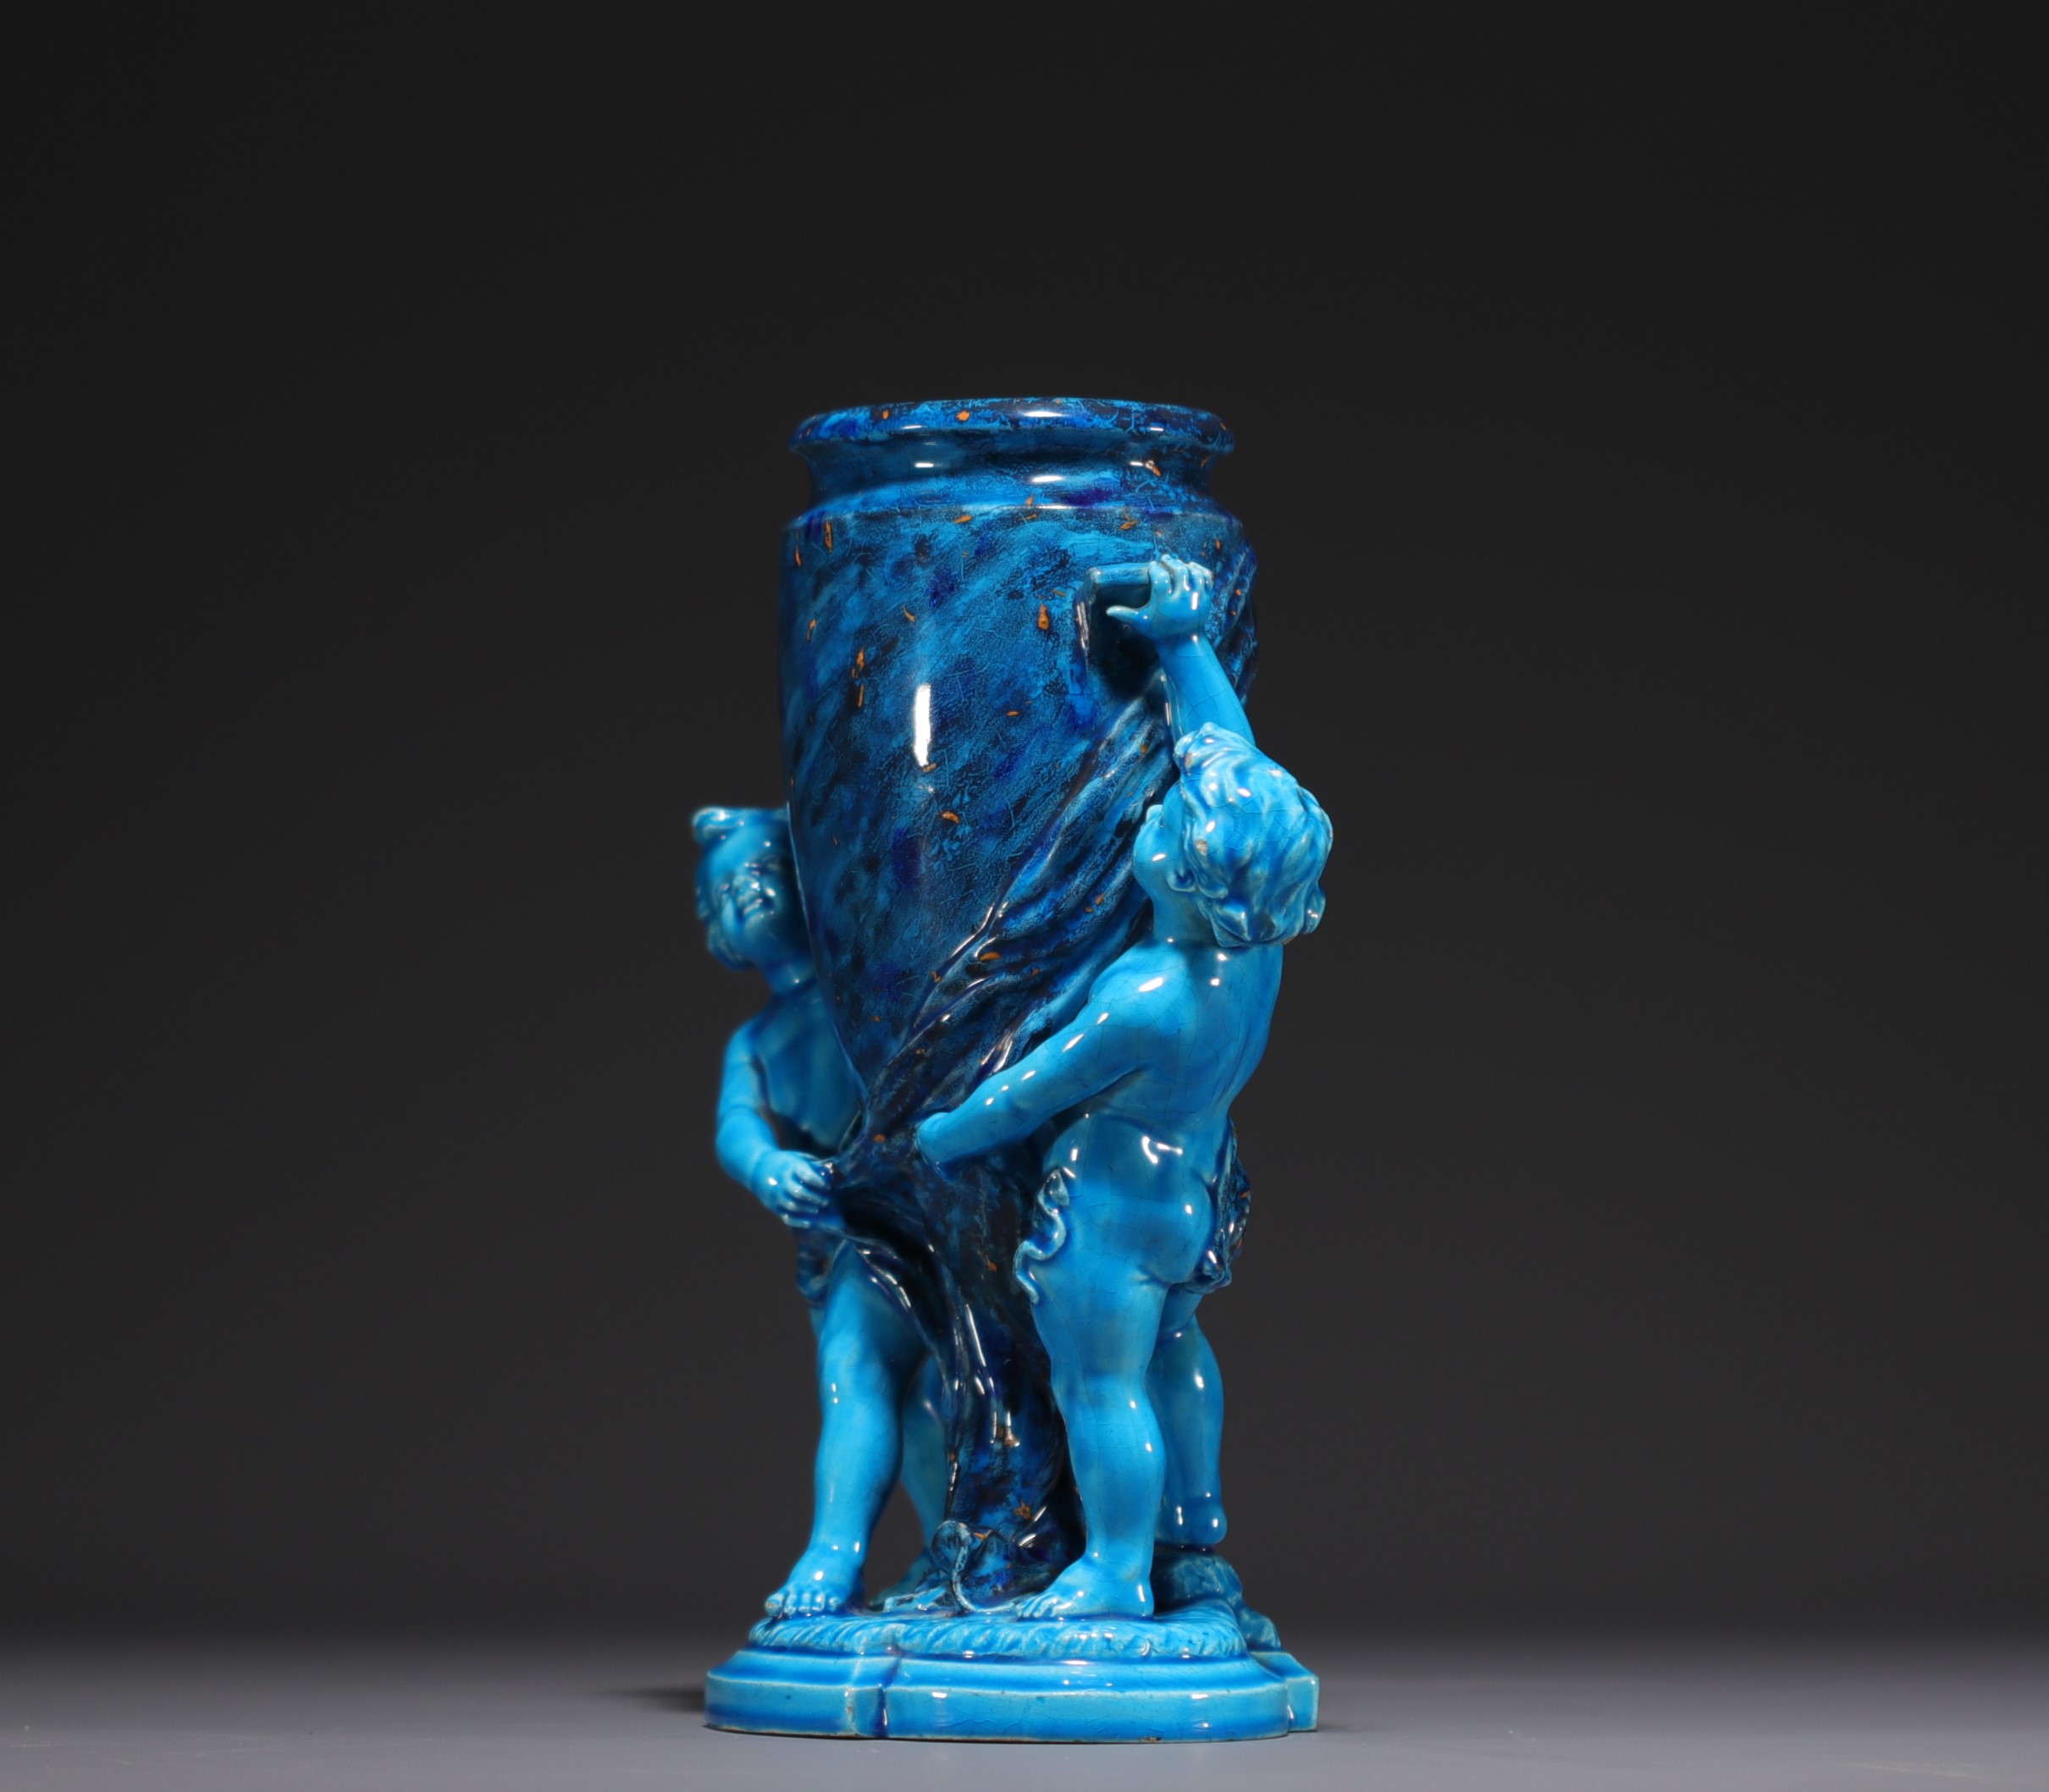 Paul MILLET (1870-1950) Blue and gold "Urne aux Putti" vase. - Image 3 of 5